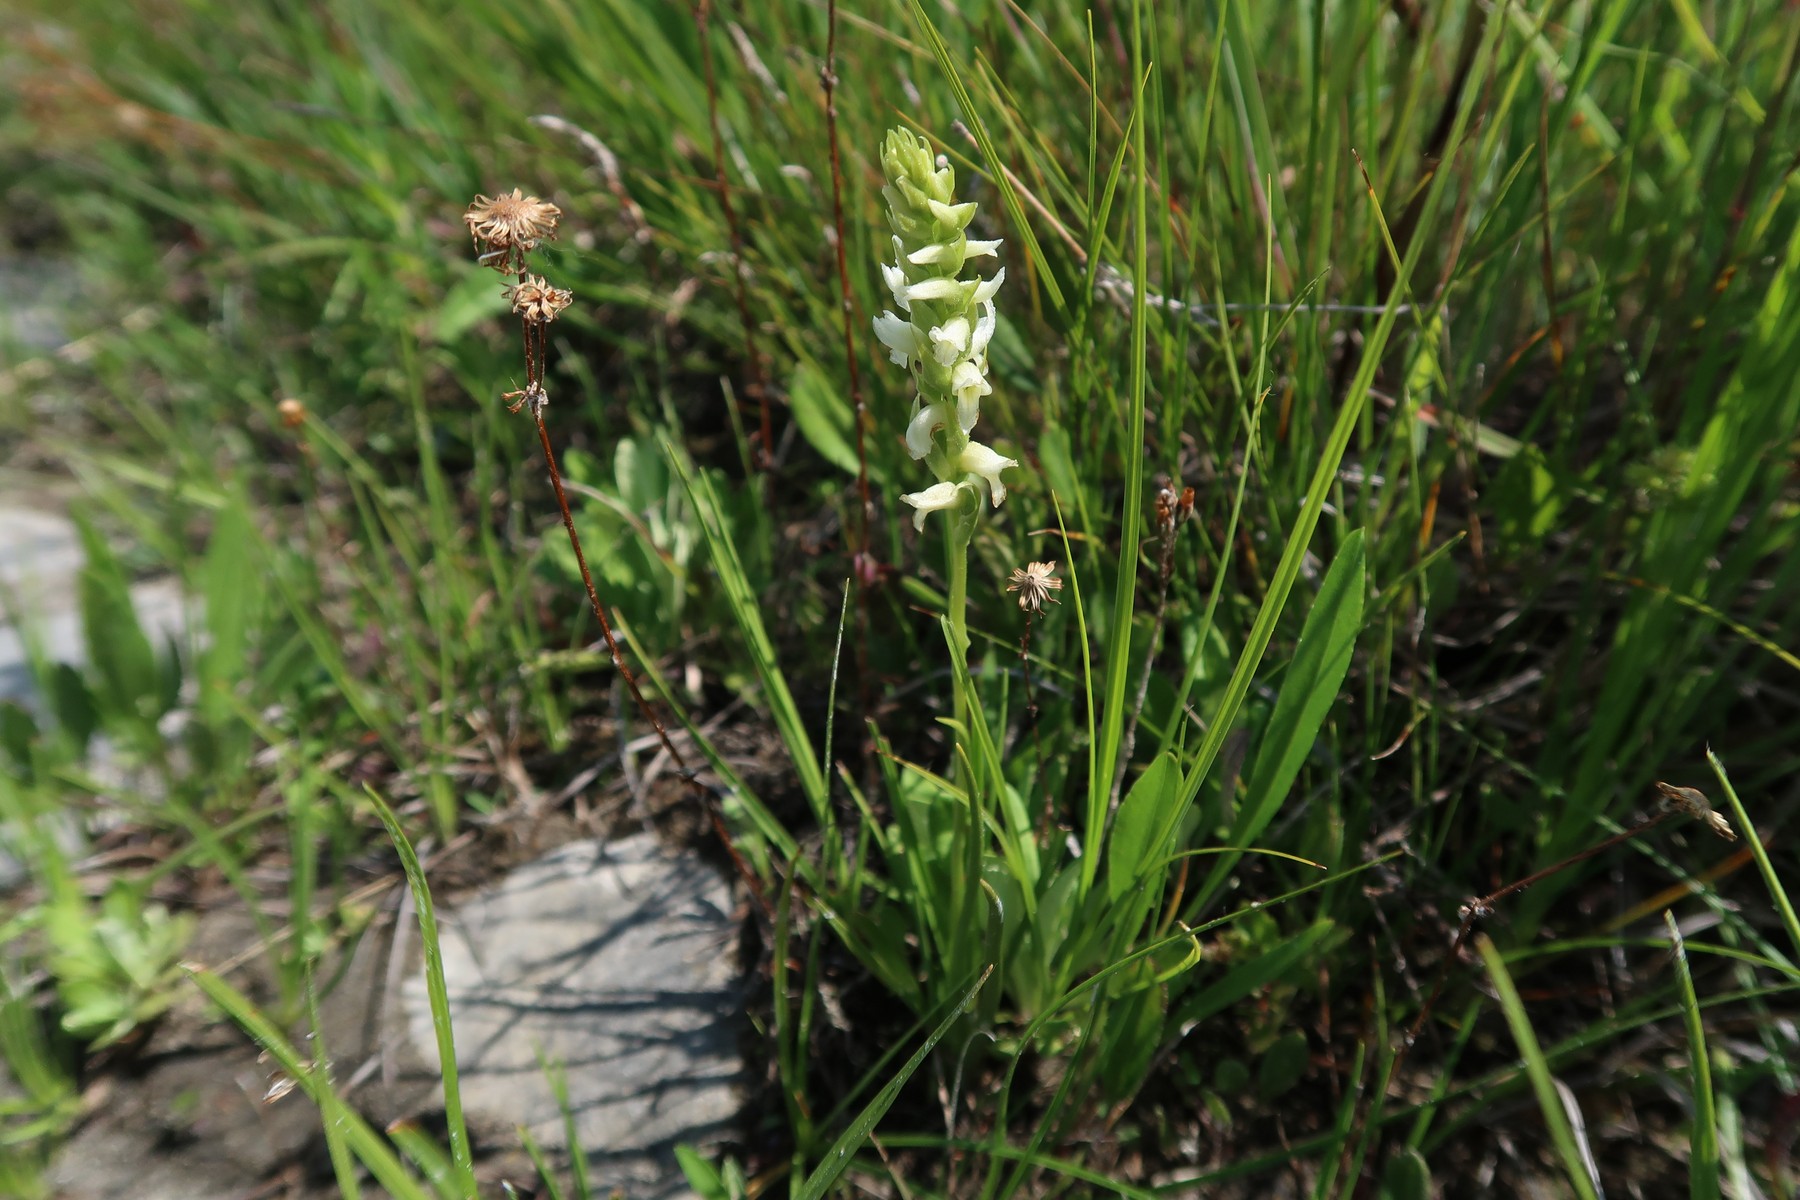 201808021449756 Hooded Ladies-Tresses (Spiranthes romanzoffiana) - Misery Bay Nature Preserve, Manitoulin Island, ON.JPG